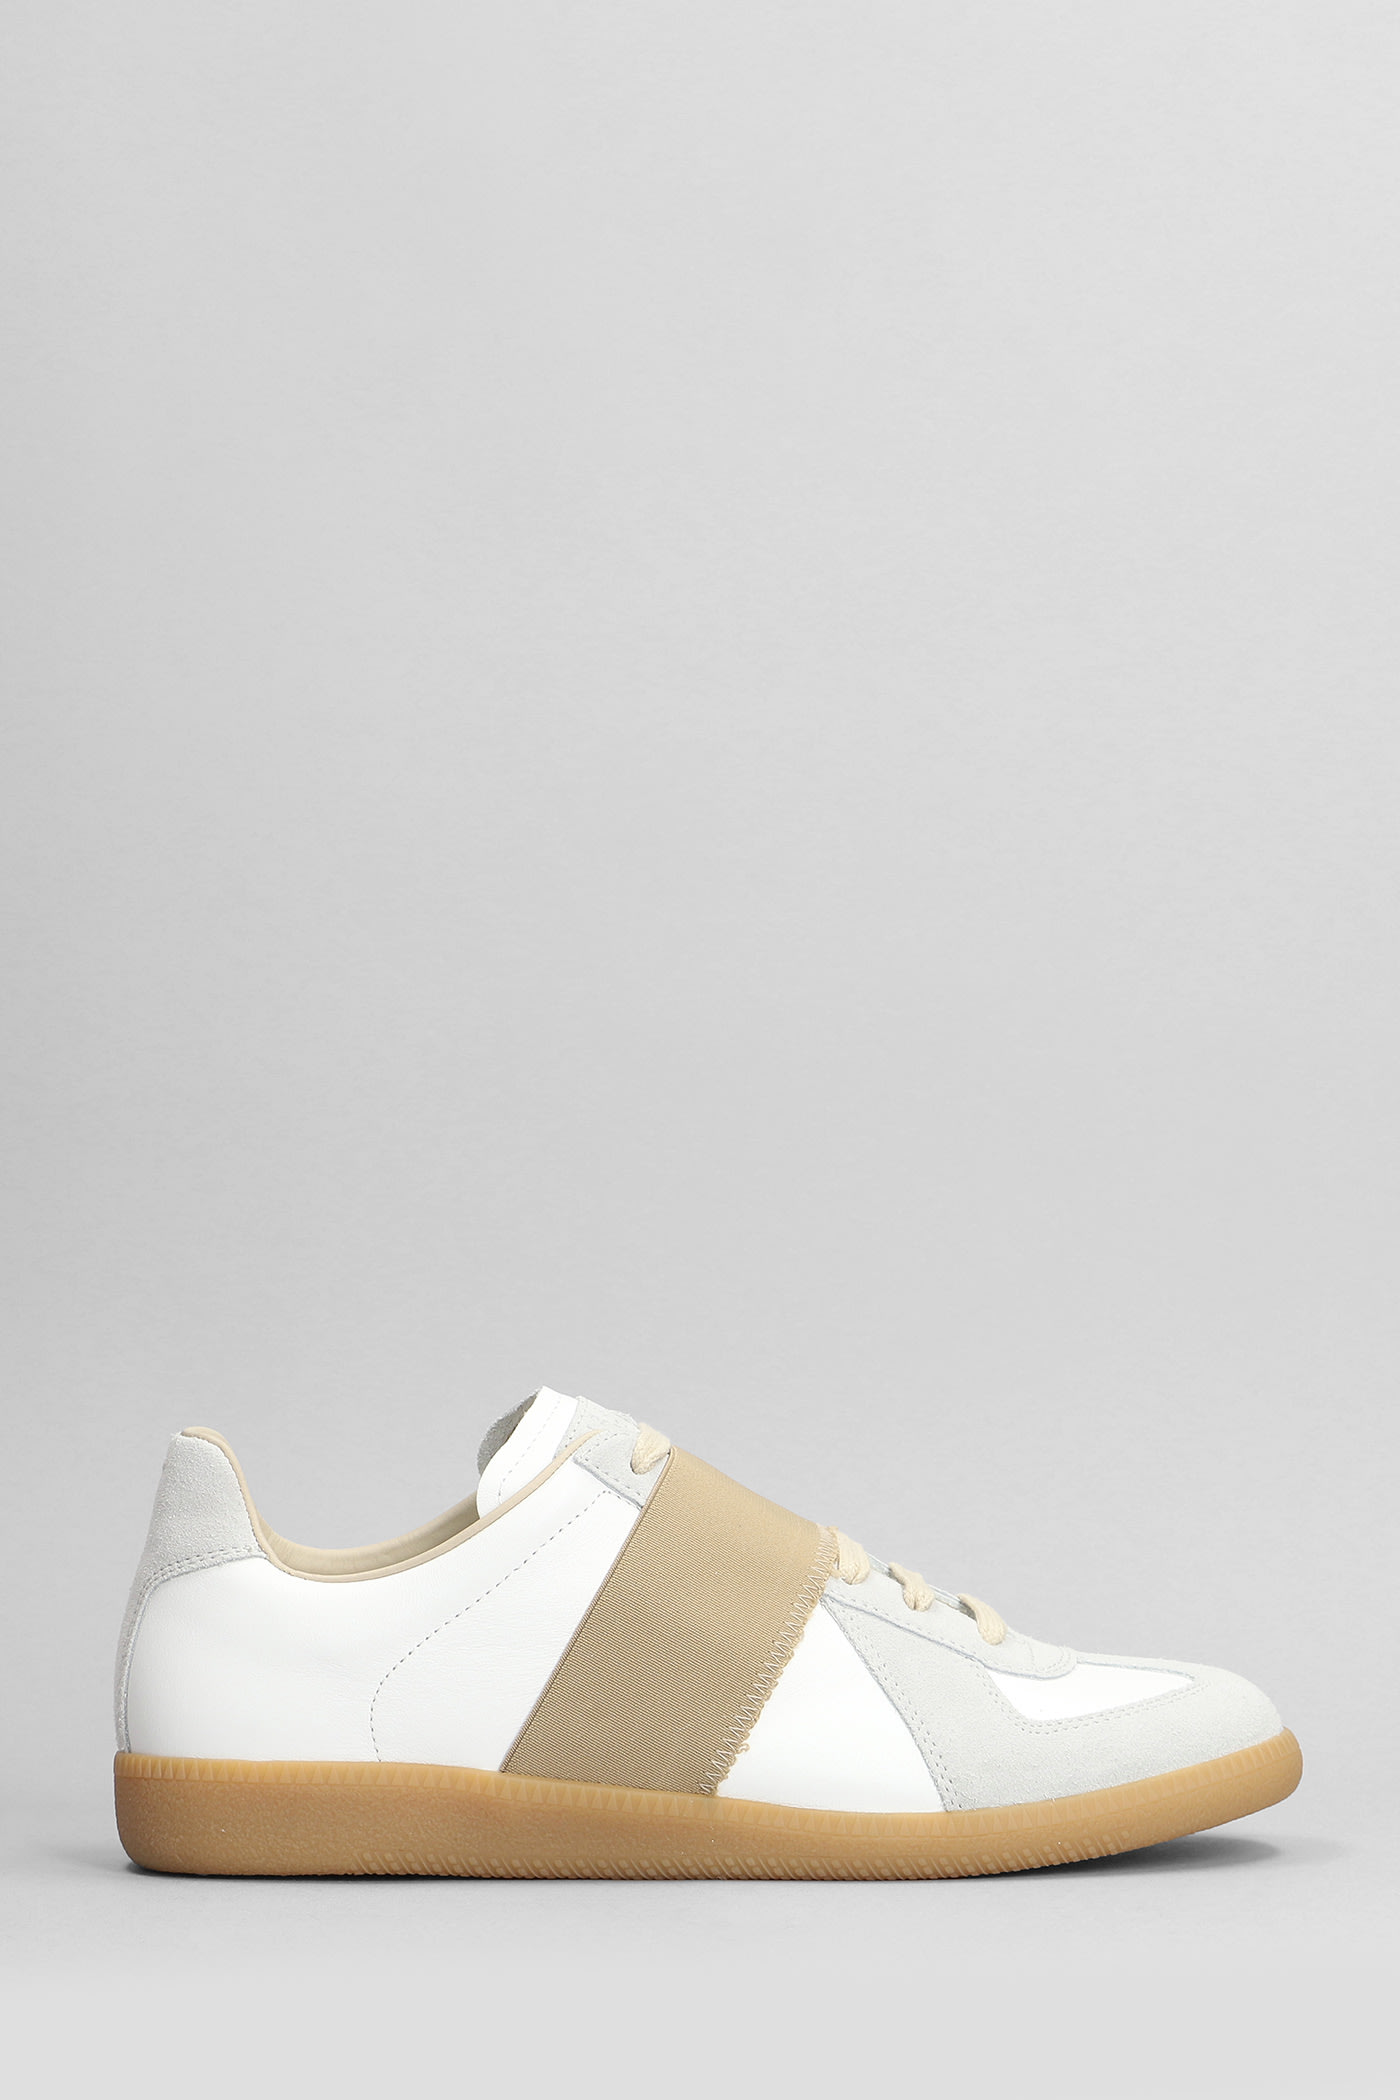 Replica Sneakers In White Suede And Leather